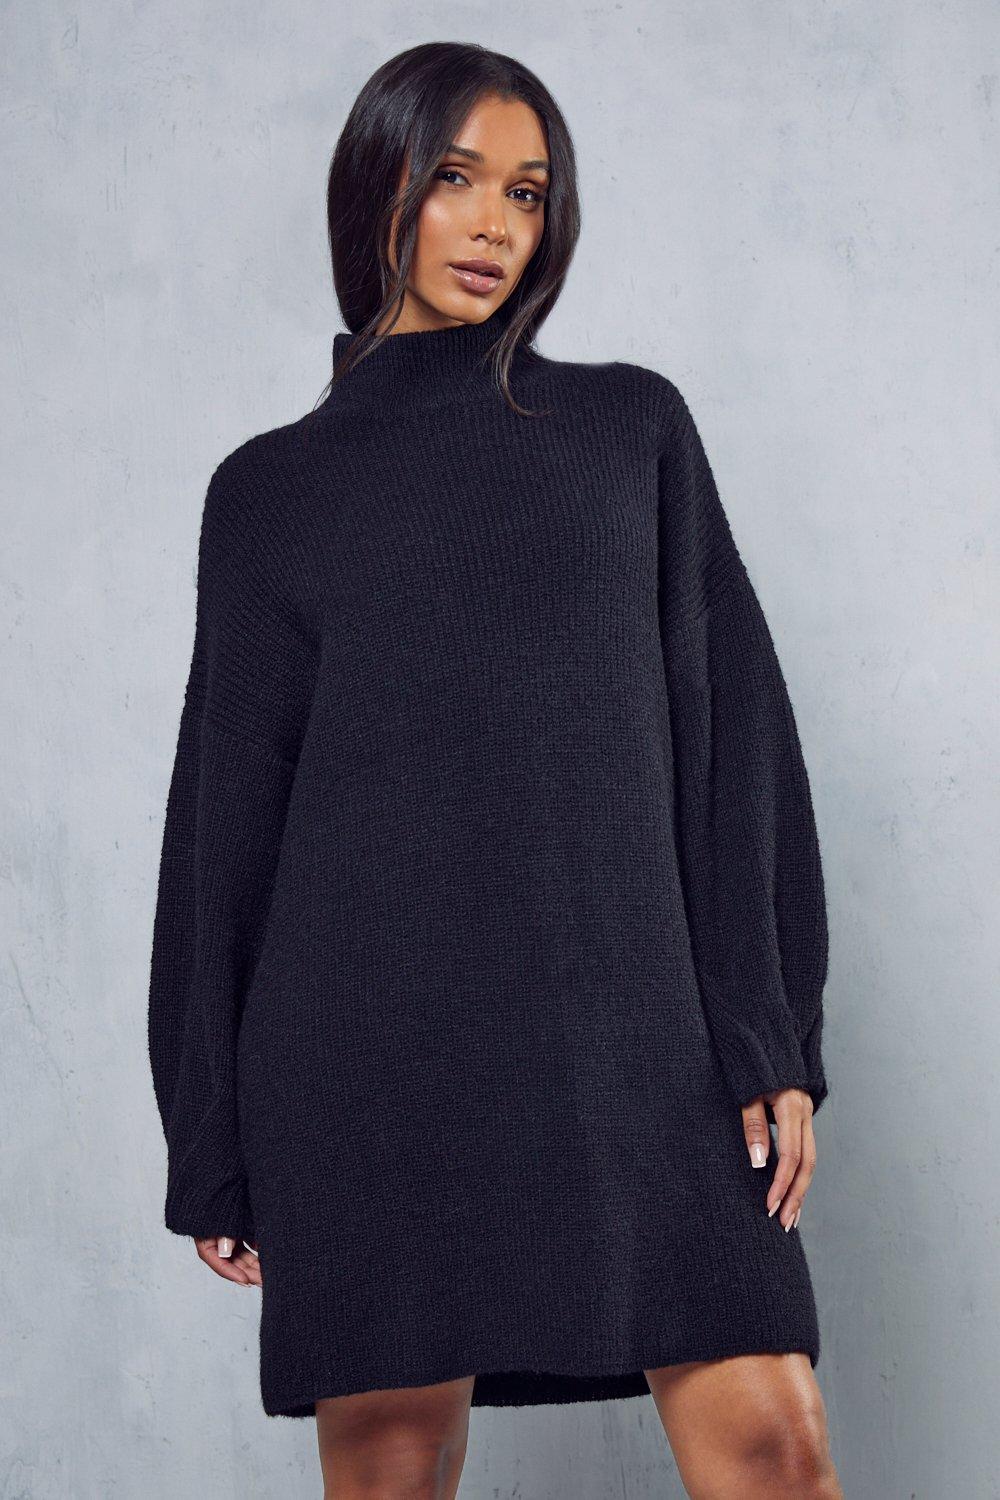 Knitted High Neck One Sleeve Maxi Dress